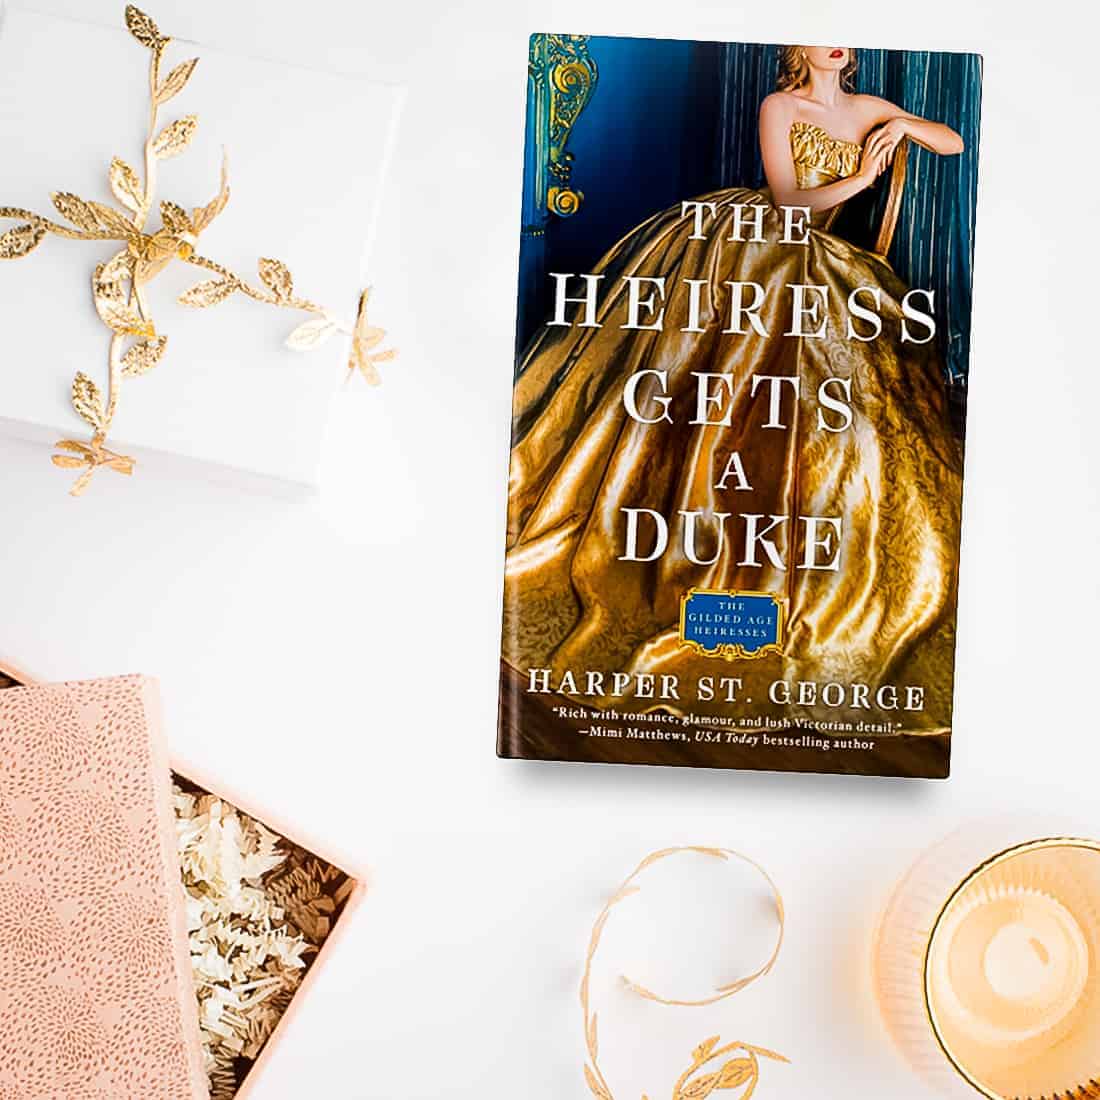 The Heiress Gets a Duke by Harper St George will pull you straight into Victorian England, where a headstrong American meets her match with an enigmatic Duke.